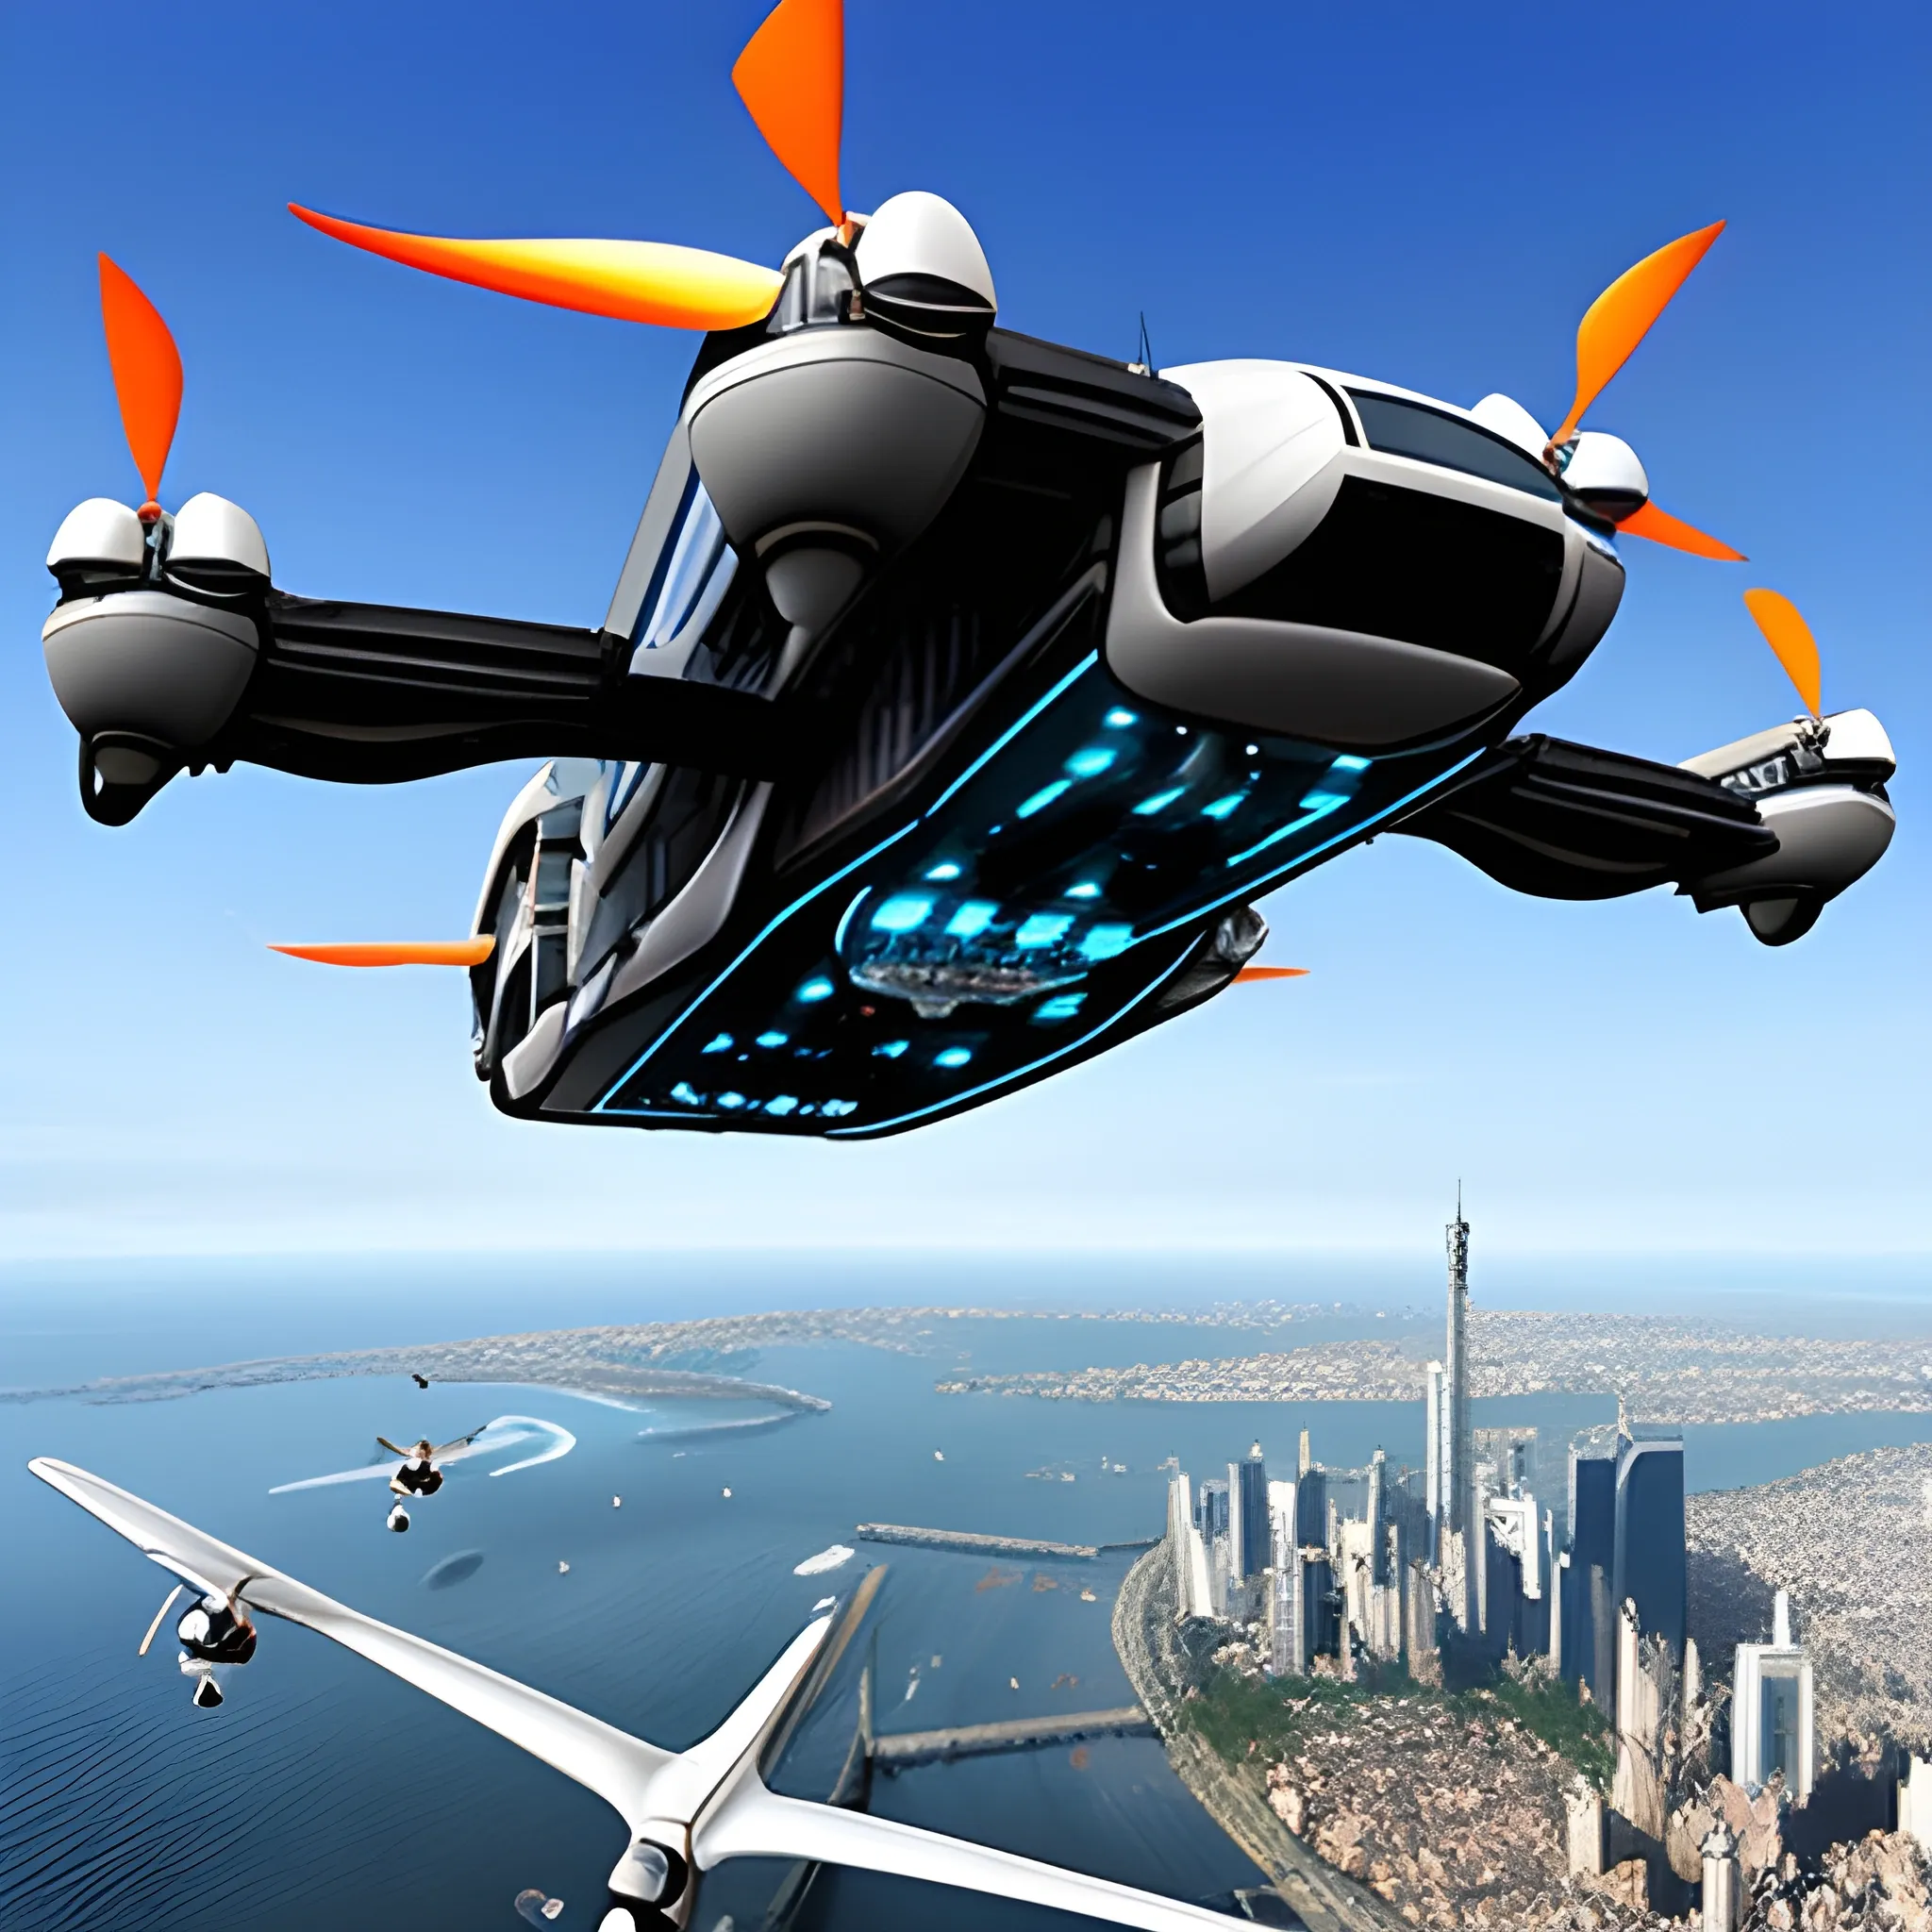 Futuristic flying car with Propeller wings, in the sky, below you can see the futuristic city, 